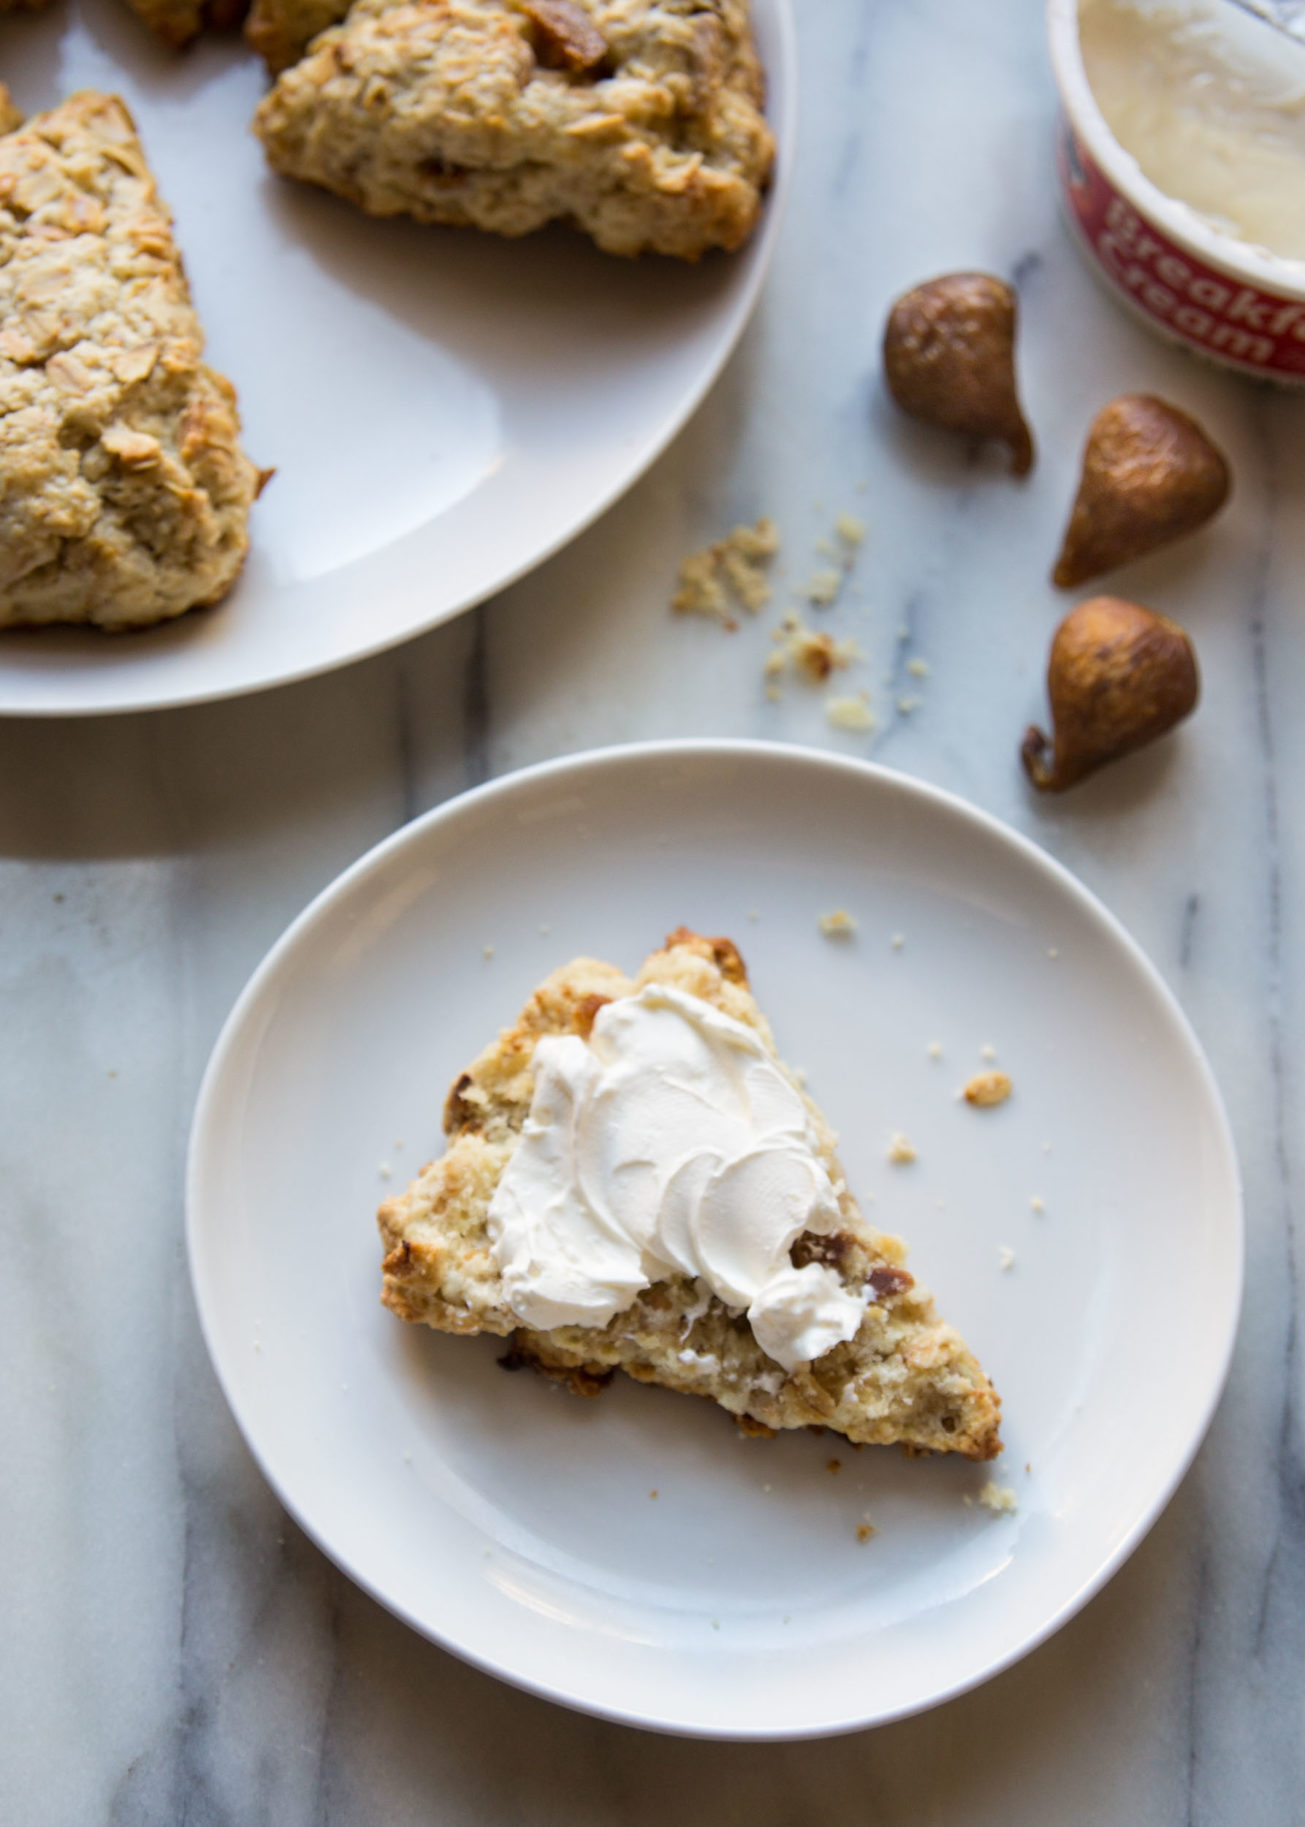 Healthy baking starts with this oat scone recipe. By making scones with oats, dried figs, and almonds, each bite is full of flavor and texture.